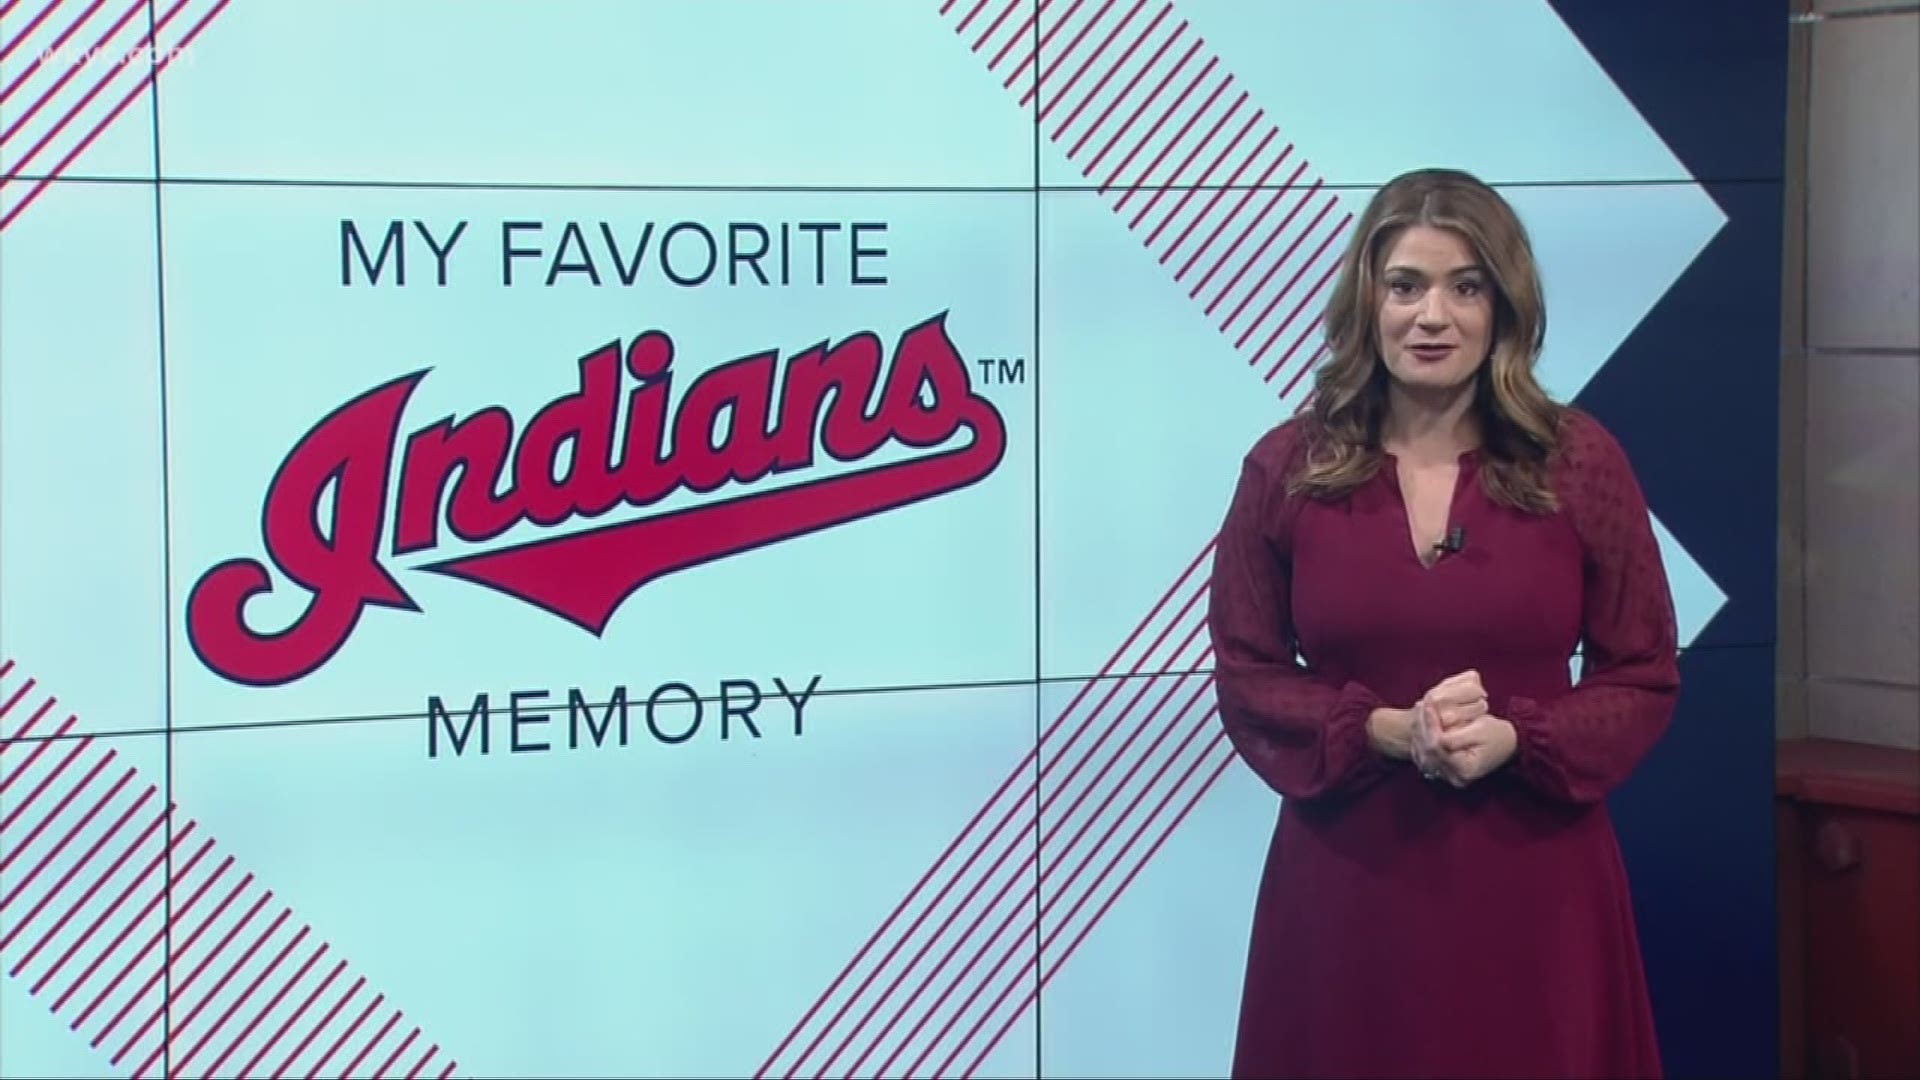 Jan. 9, 2019: As we look forward to Tribe Fest this weekend, Maureen Kyle shares her favorite memory of the Cleveland Indians.